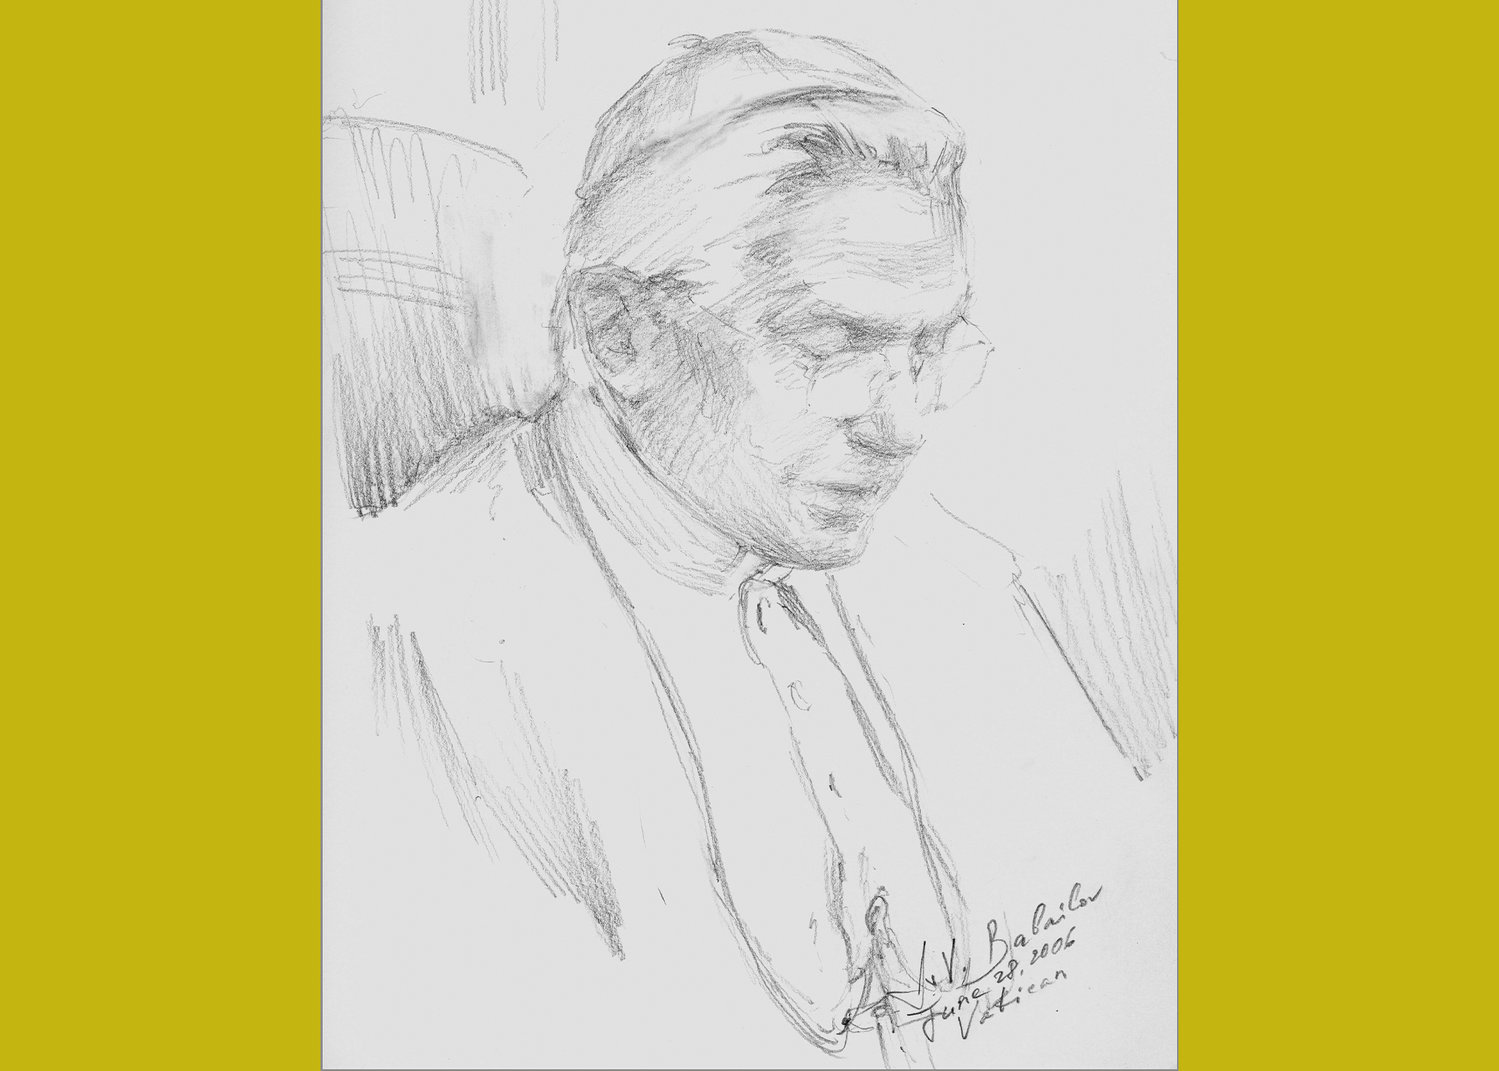 This sketch of Pope Emeritus Benedict XVI was done by Igor Babailov during an audience with the late pope and before he began his oil portrait of the pontiff. Babailov was commissioned in 2006 to do the pope’s official portrait and completed it a year later.